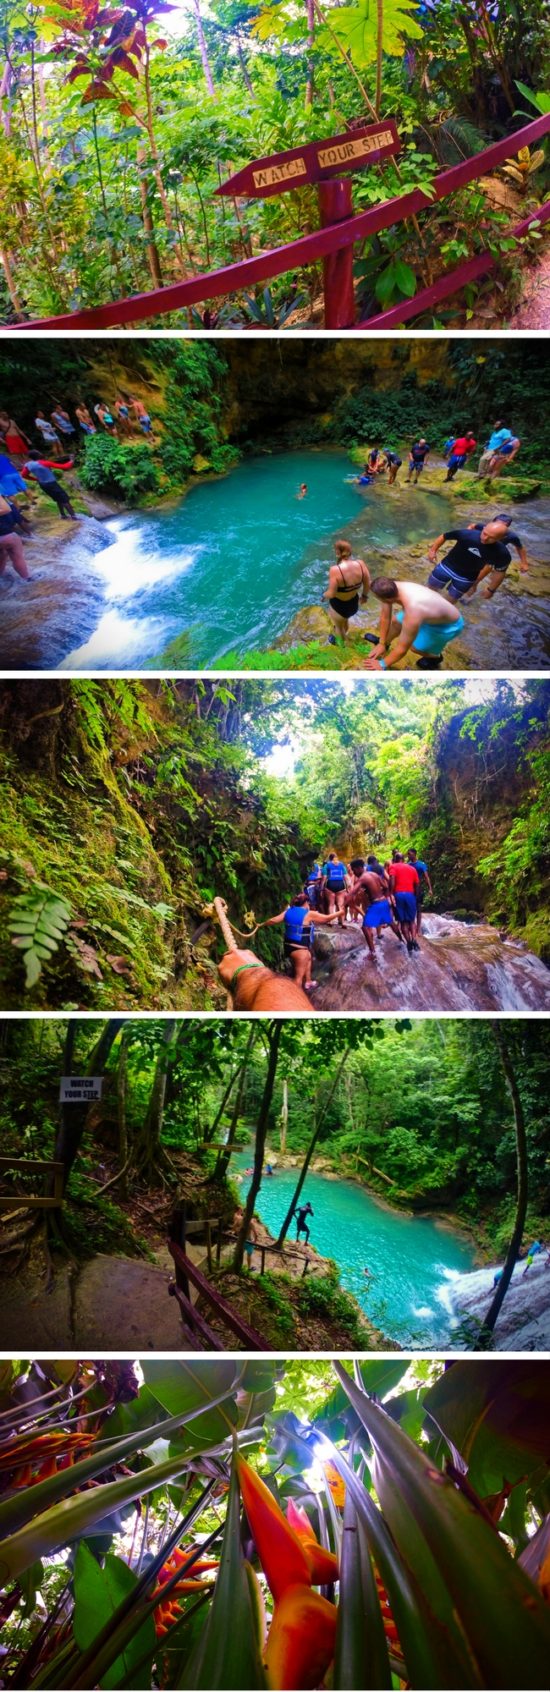 Jumping off waterfalls at the Blue Hole in Ocho Rios, Jamaica is an awesome jungle experience. 2traveldads.com